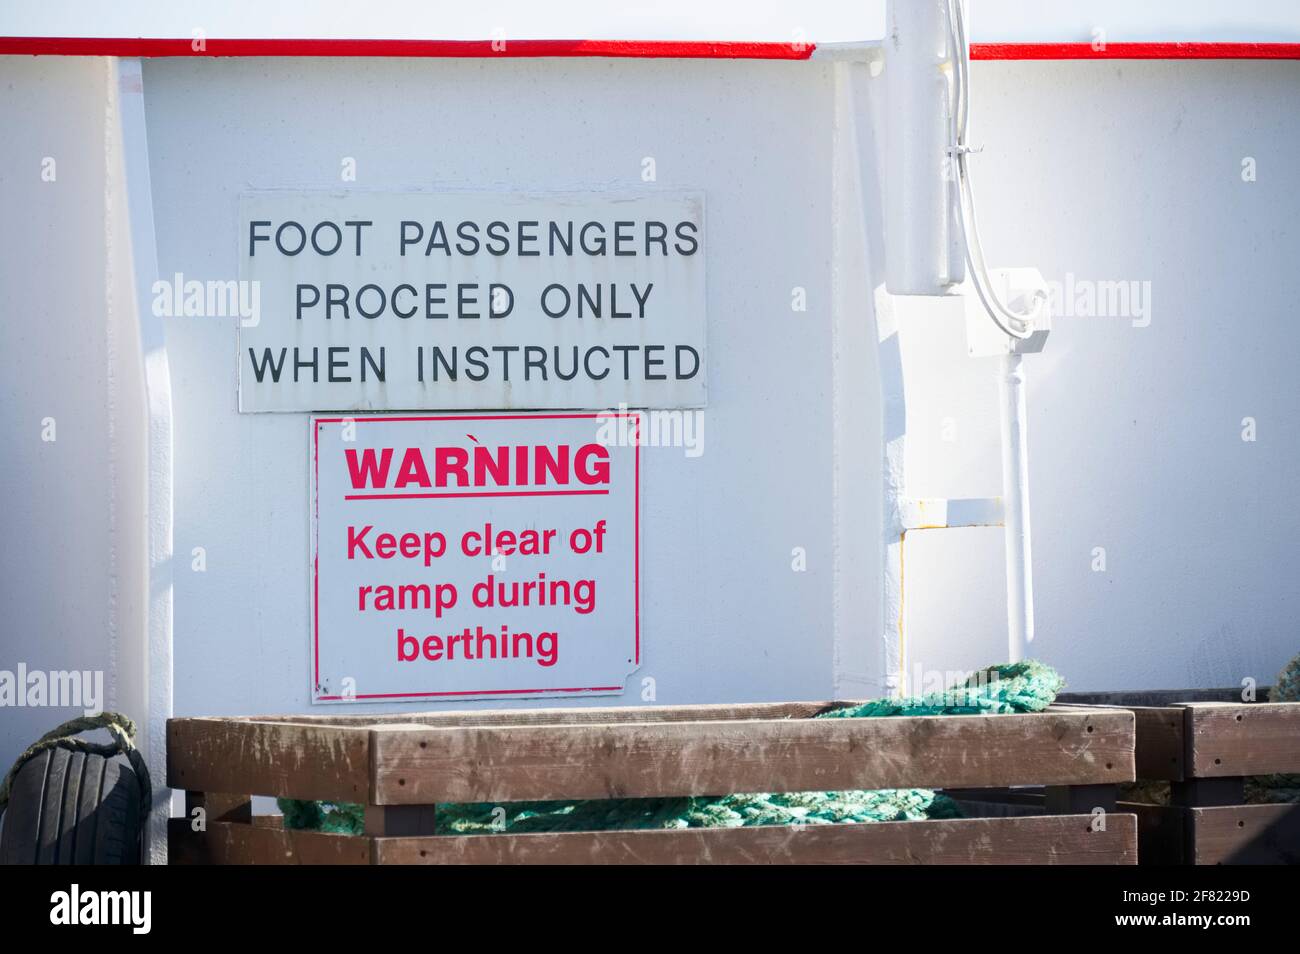 Ferry ship safety sign for foot passengers Stock Photo